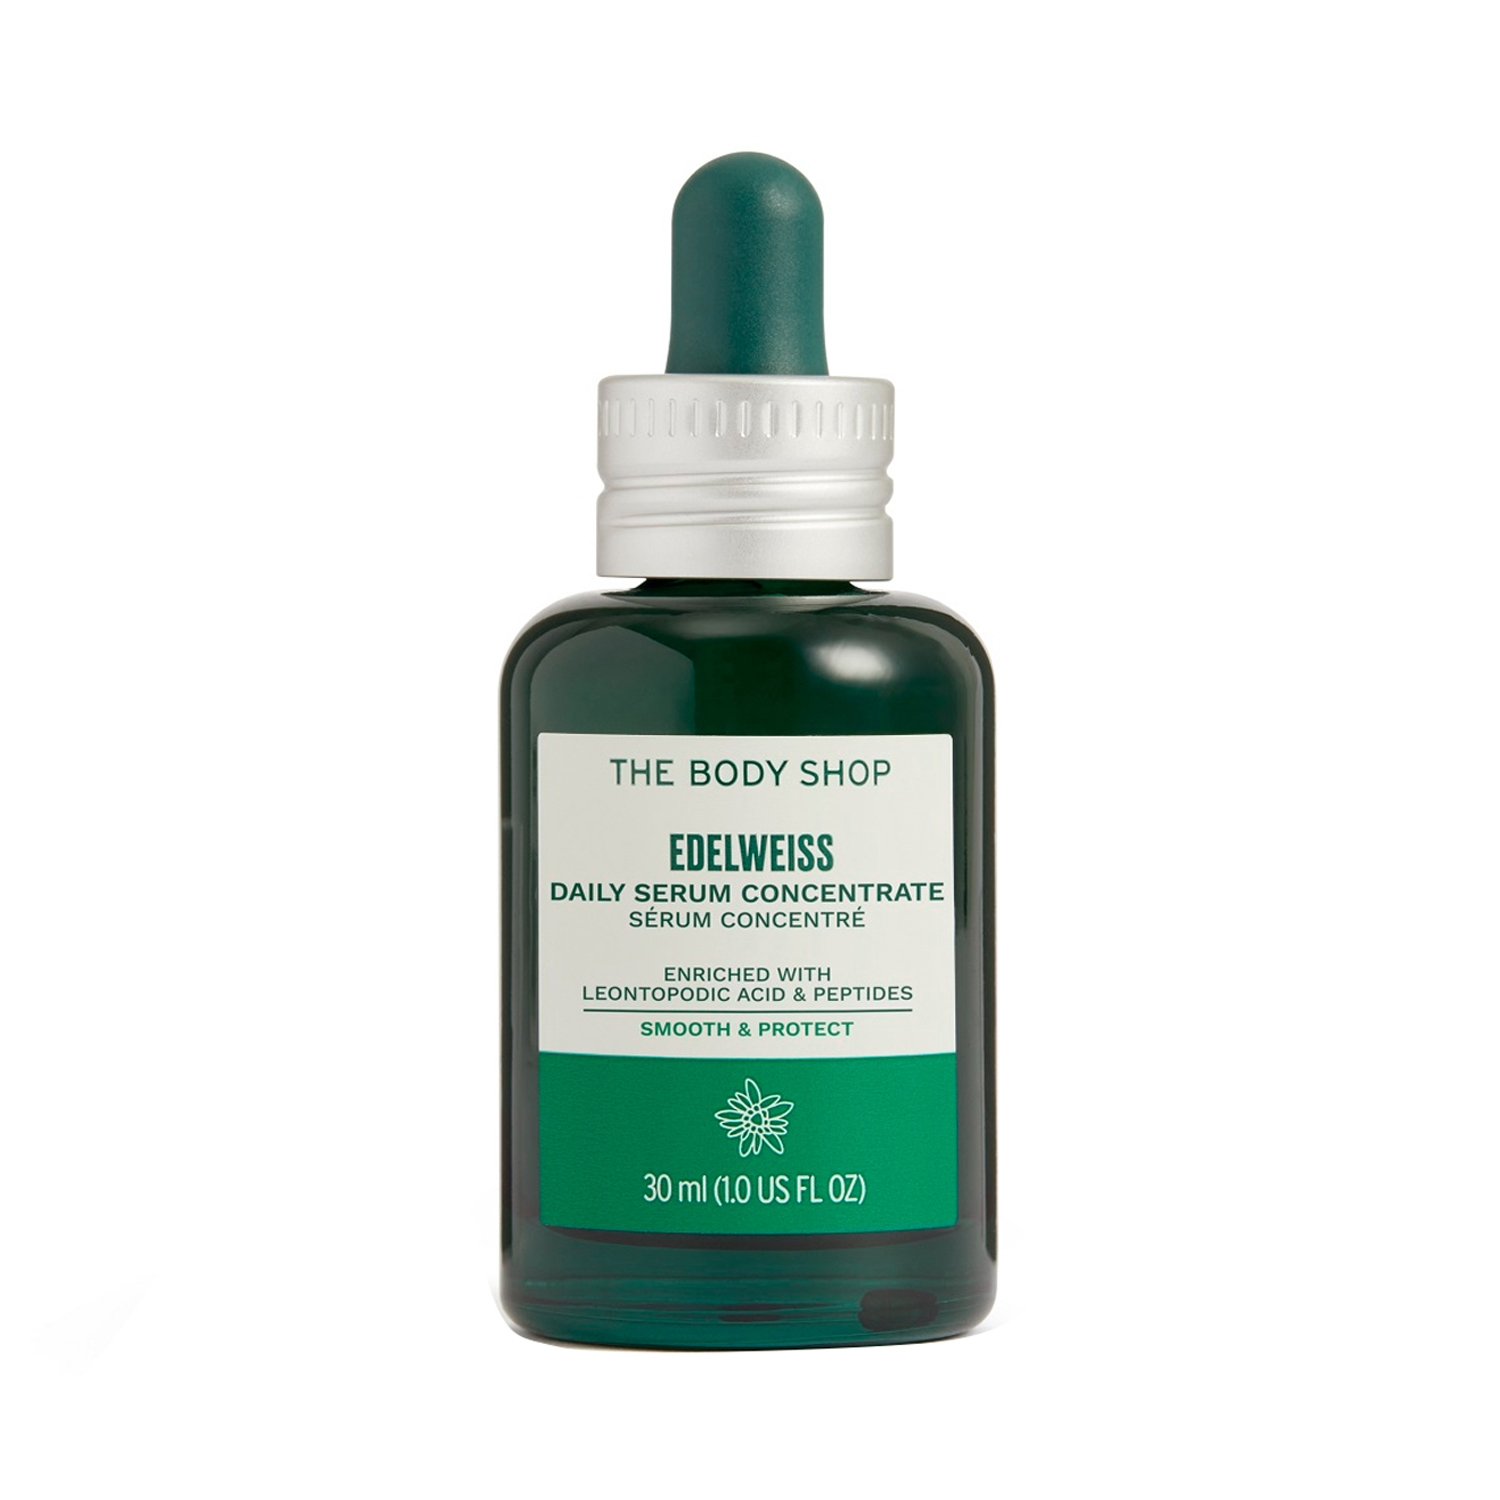 The Body Shop | The Body Shop Edelweiss Daily Serum Concentrate (30ml)